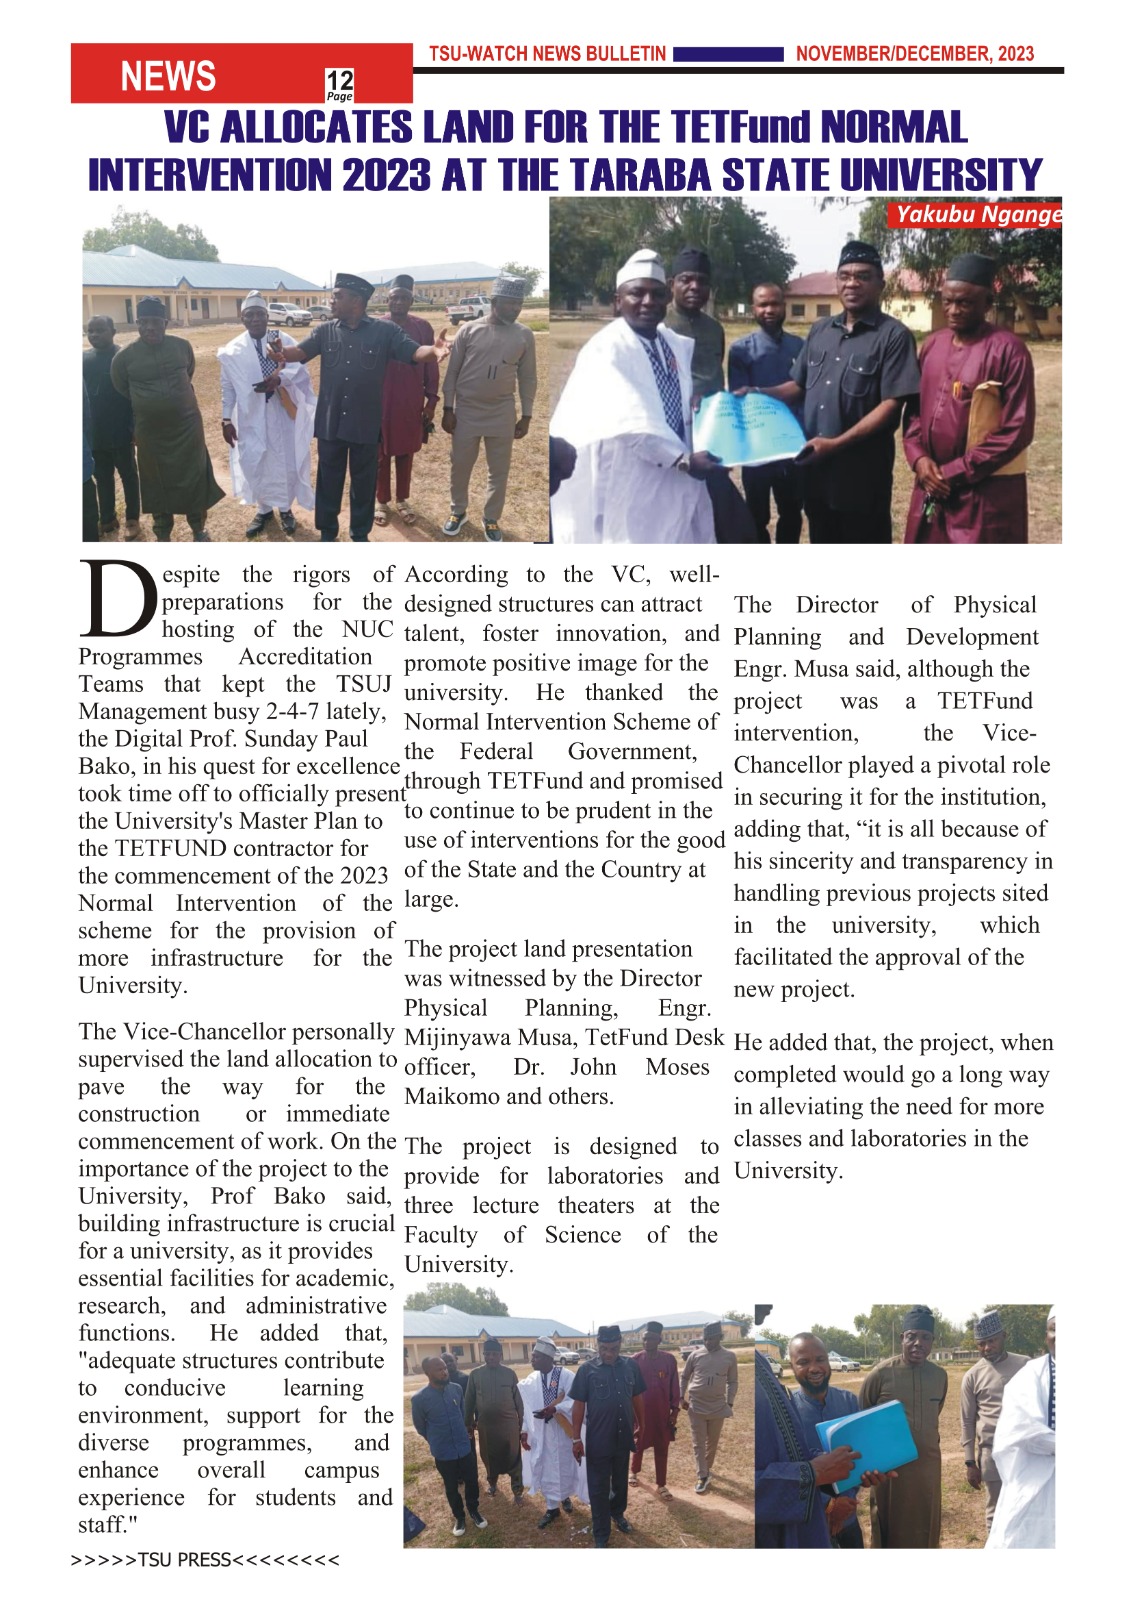 VC ALLOCATES LAND FOR THE TETFUND NORMAL INTERVENTION 2023 AT THE TARABA STATE UNIVERSITY